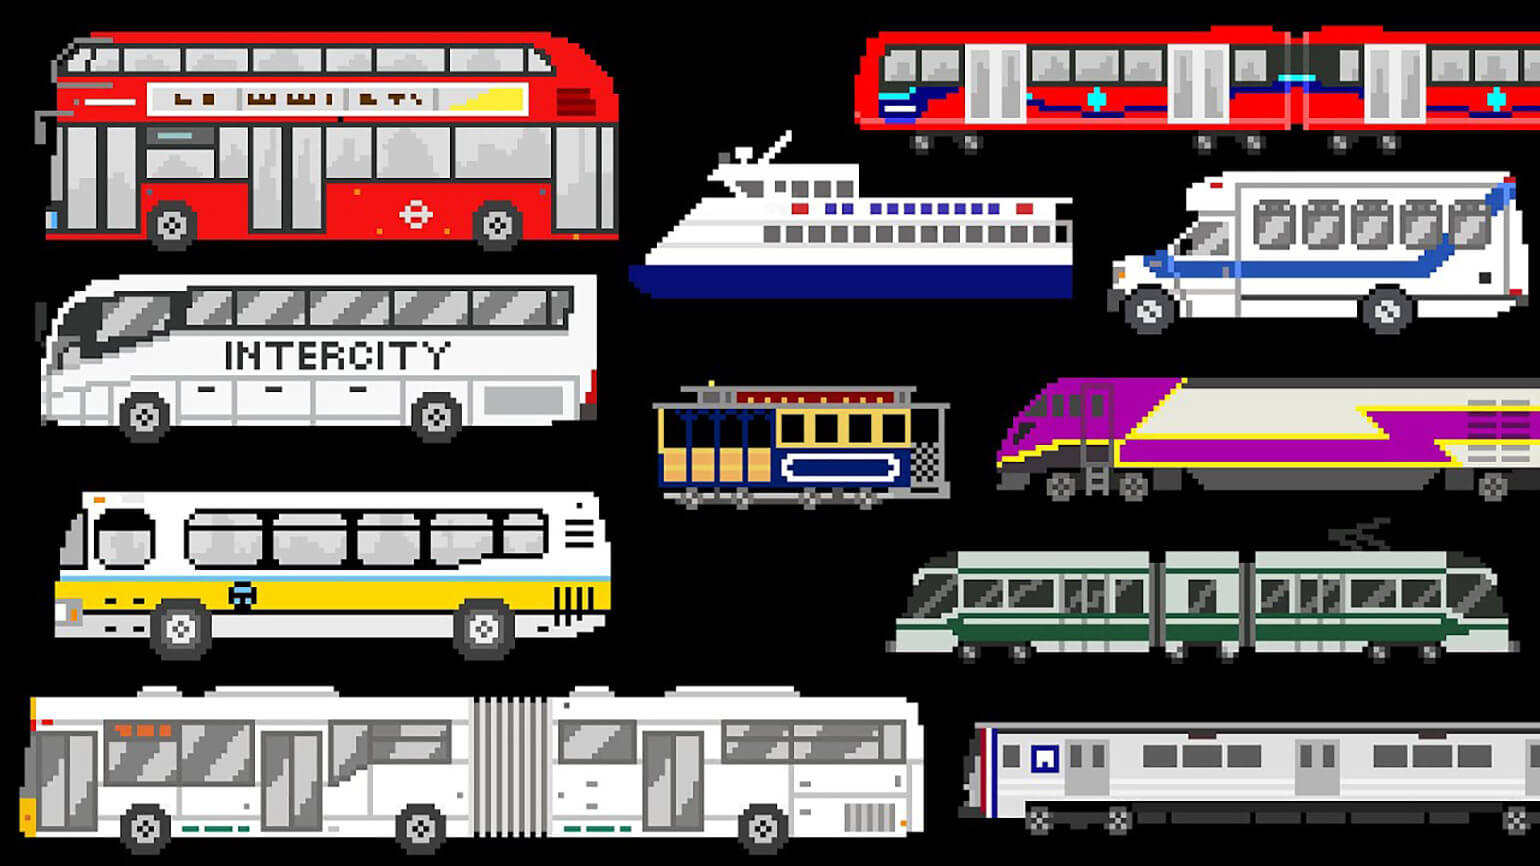 Digitally designed image of various forms of public transportation including subway cars, buses, double deck buses, vans, and ferries.